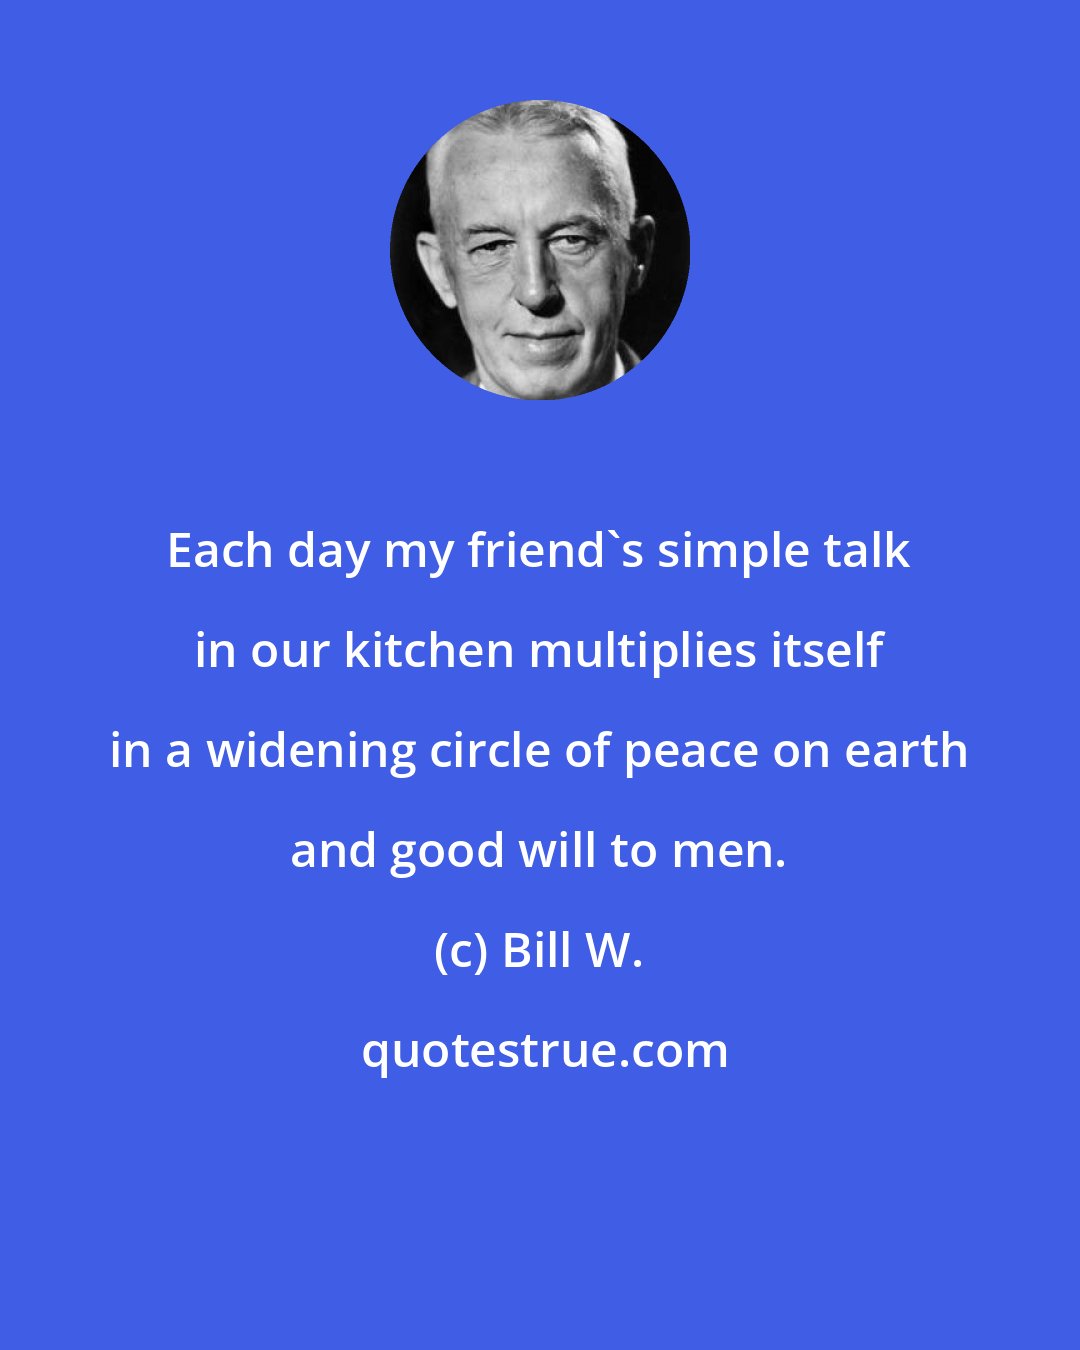 Bill W.: Each day my friend's simple talk in our kitchen multiplies itself in a widening circle of peace on earth and good will to men.